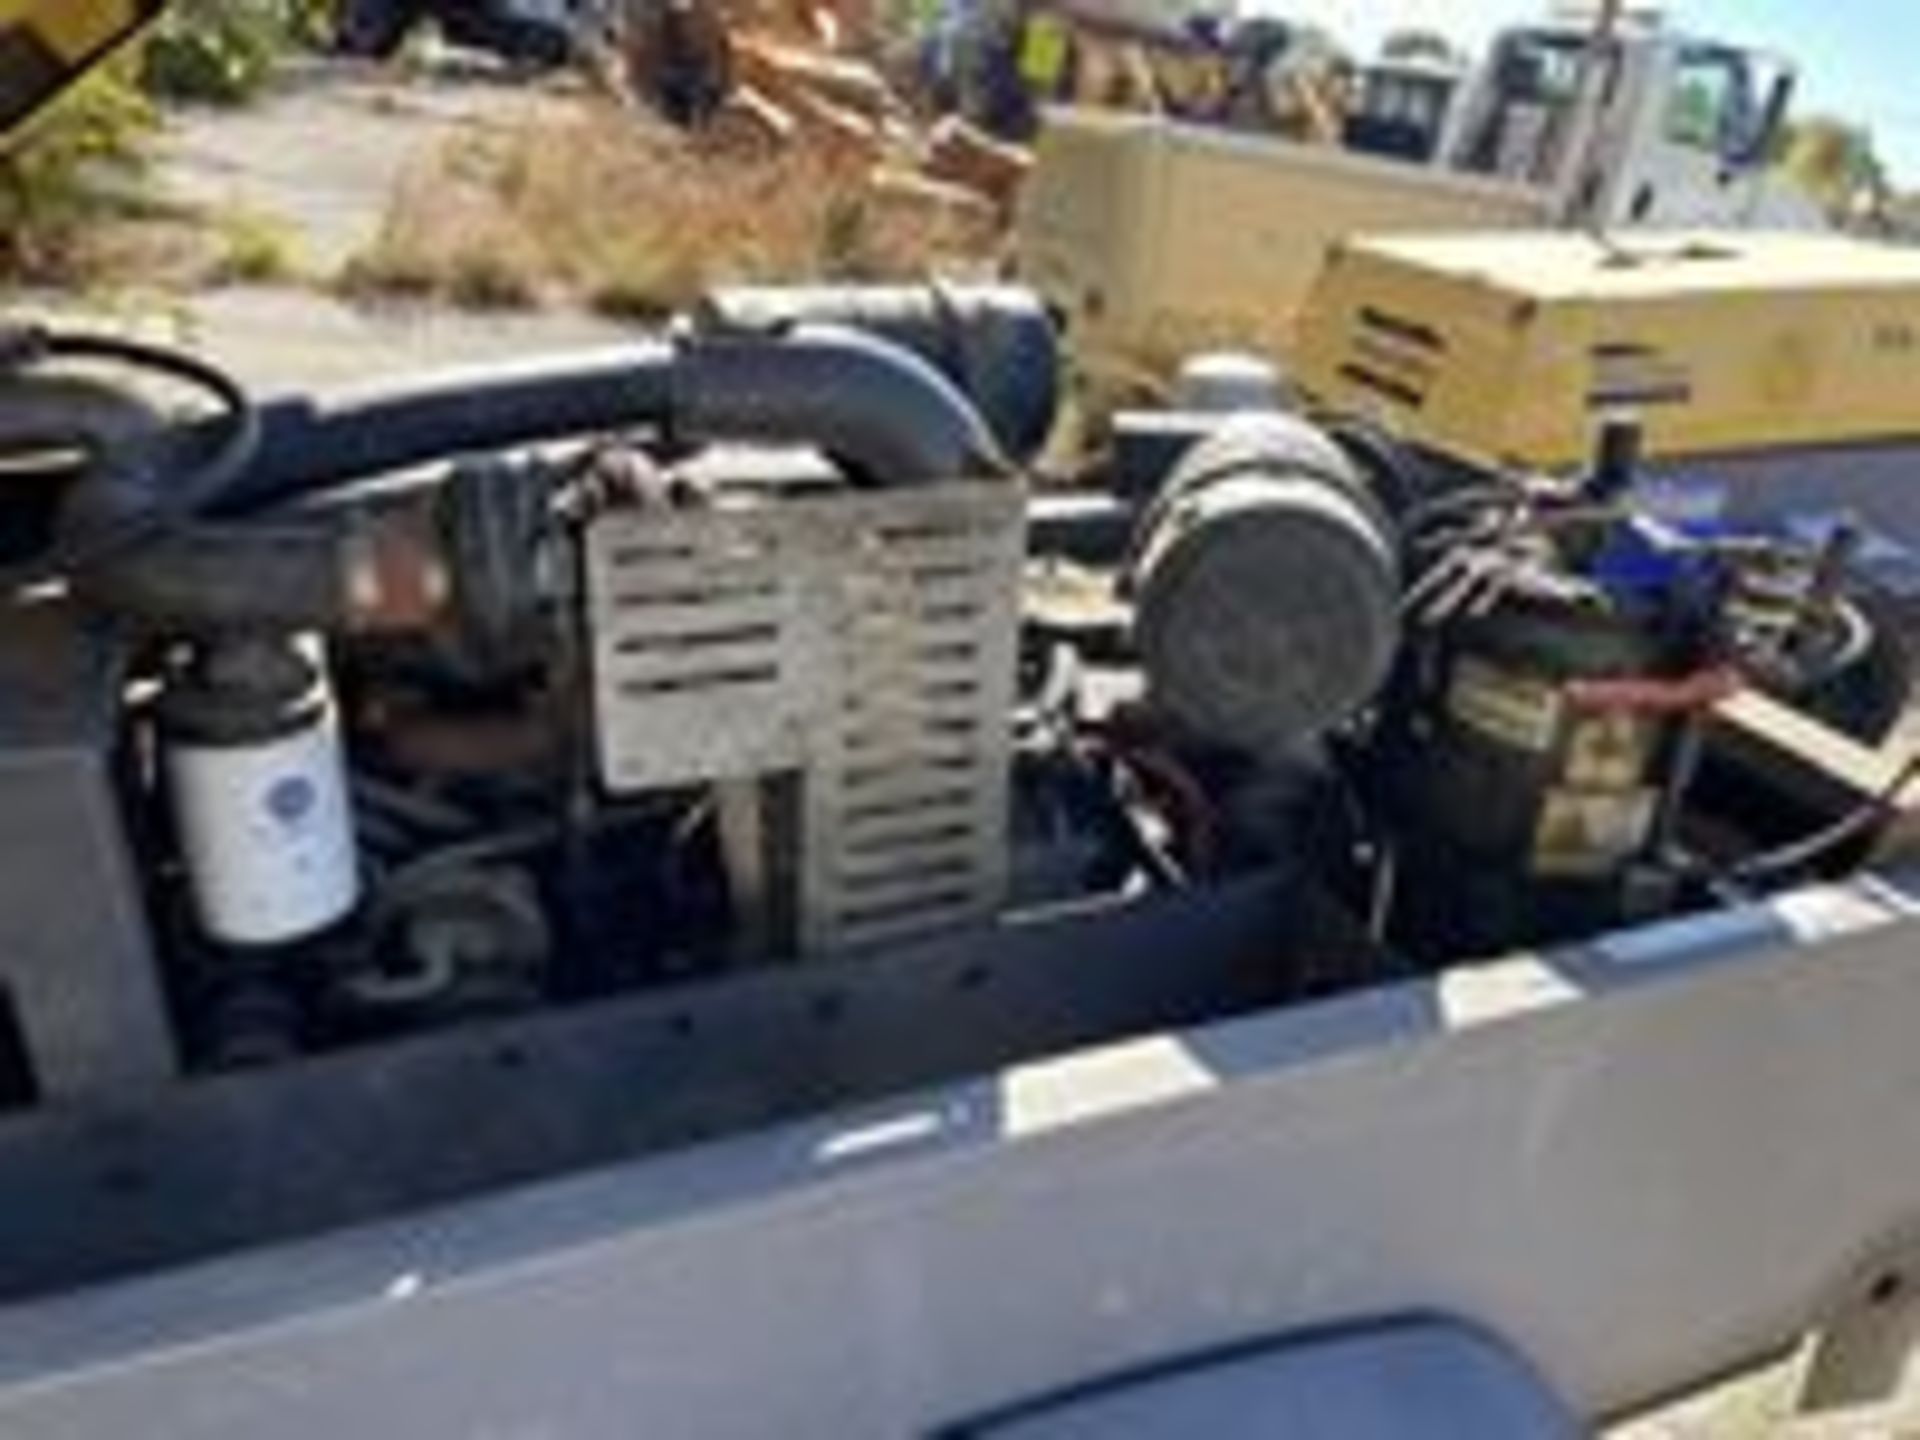 Atlas Copco XAS 185 JD7 Towable Air Compressor, Pintle Hitch, 49 HP, Hrs: 11,288 (STARTS) - Image 5 of 5